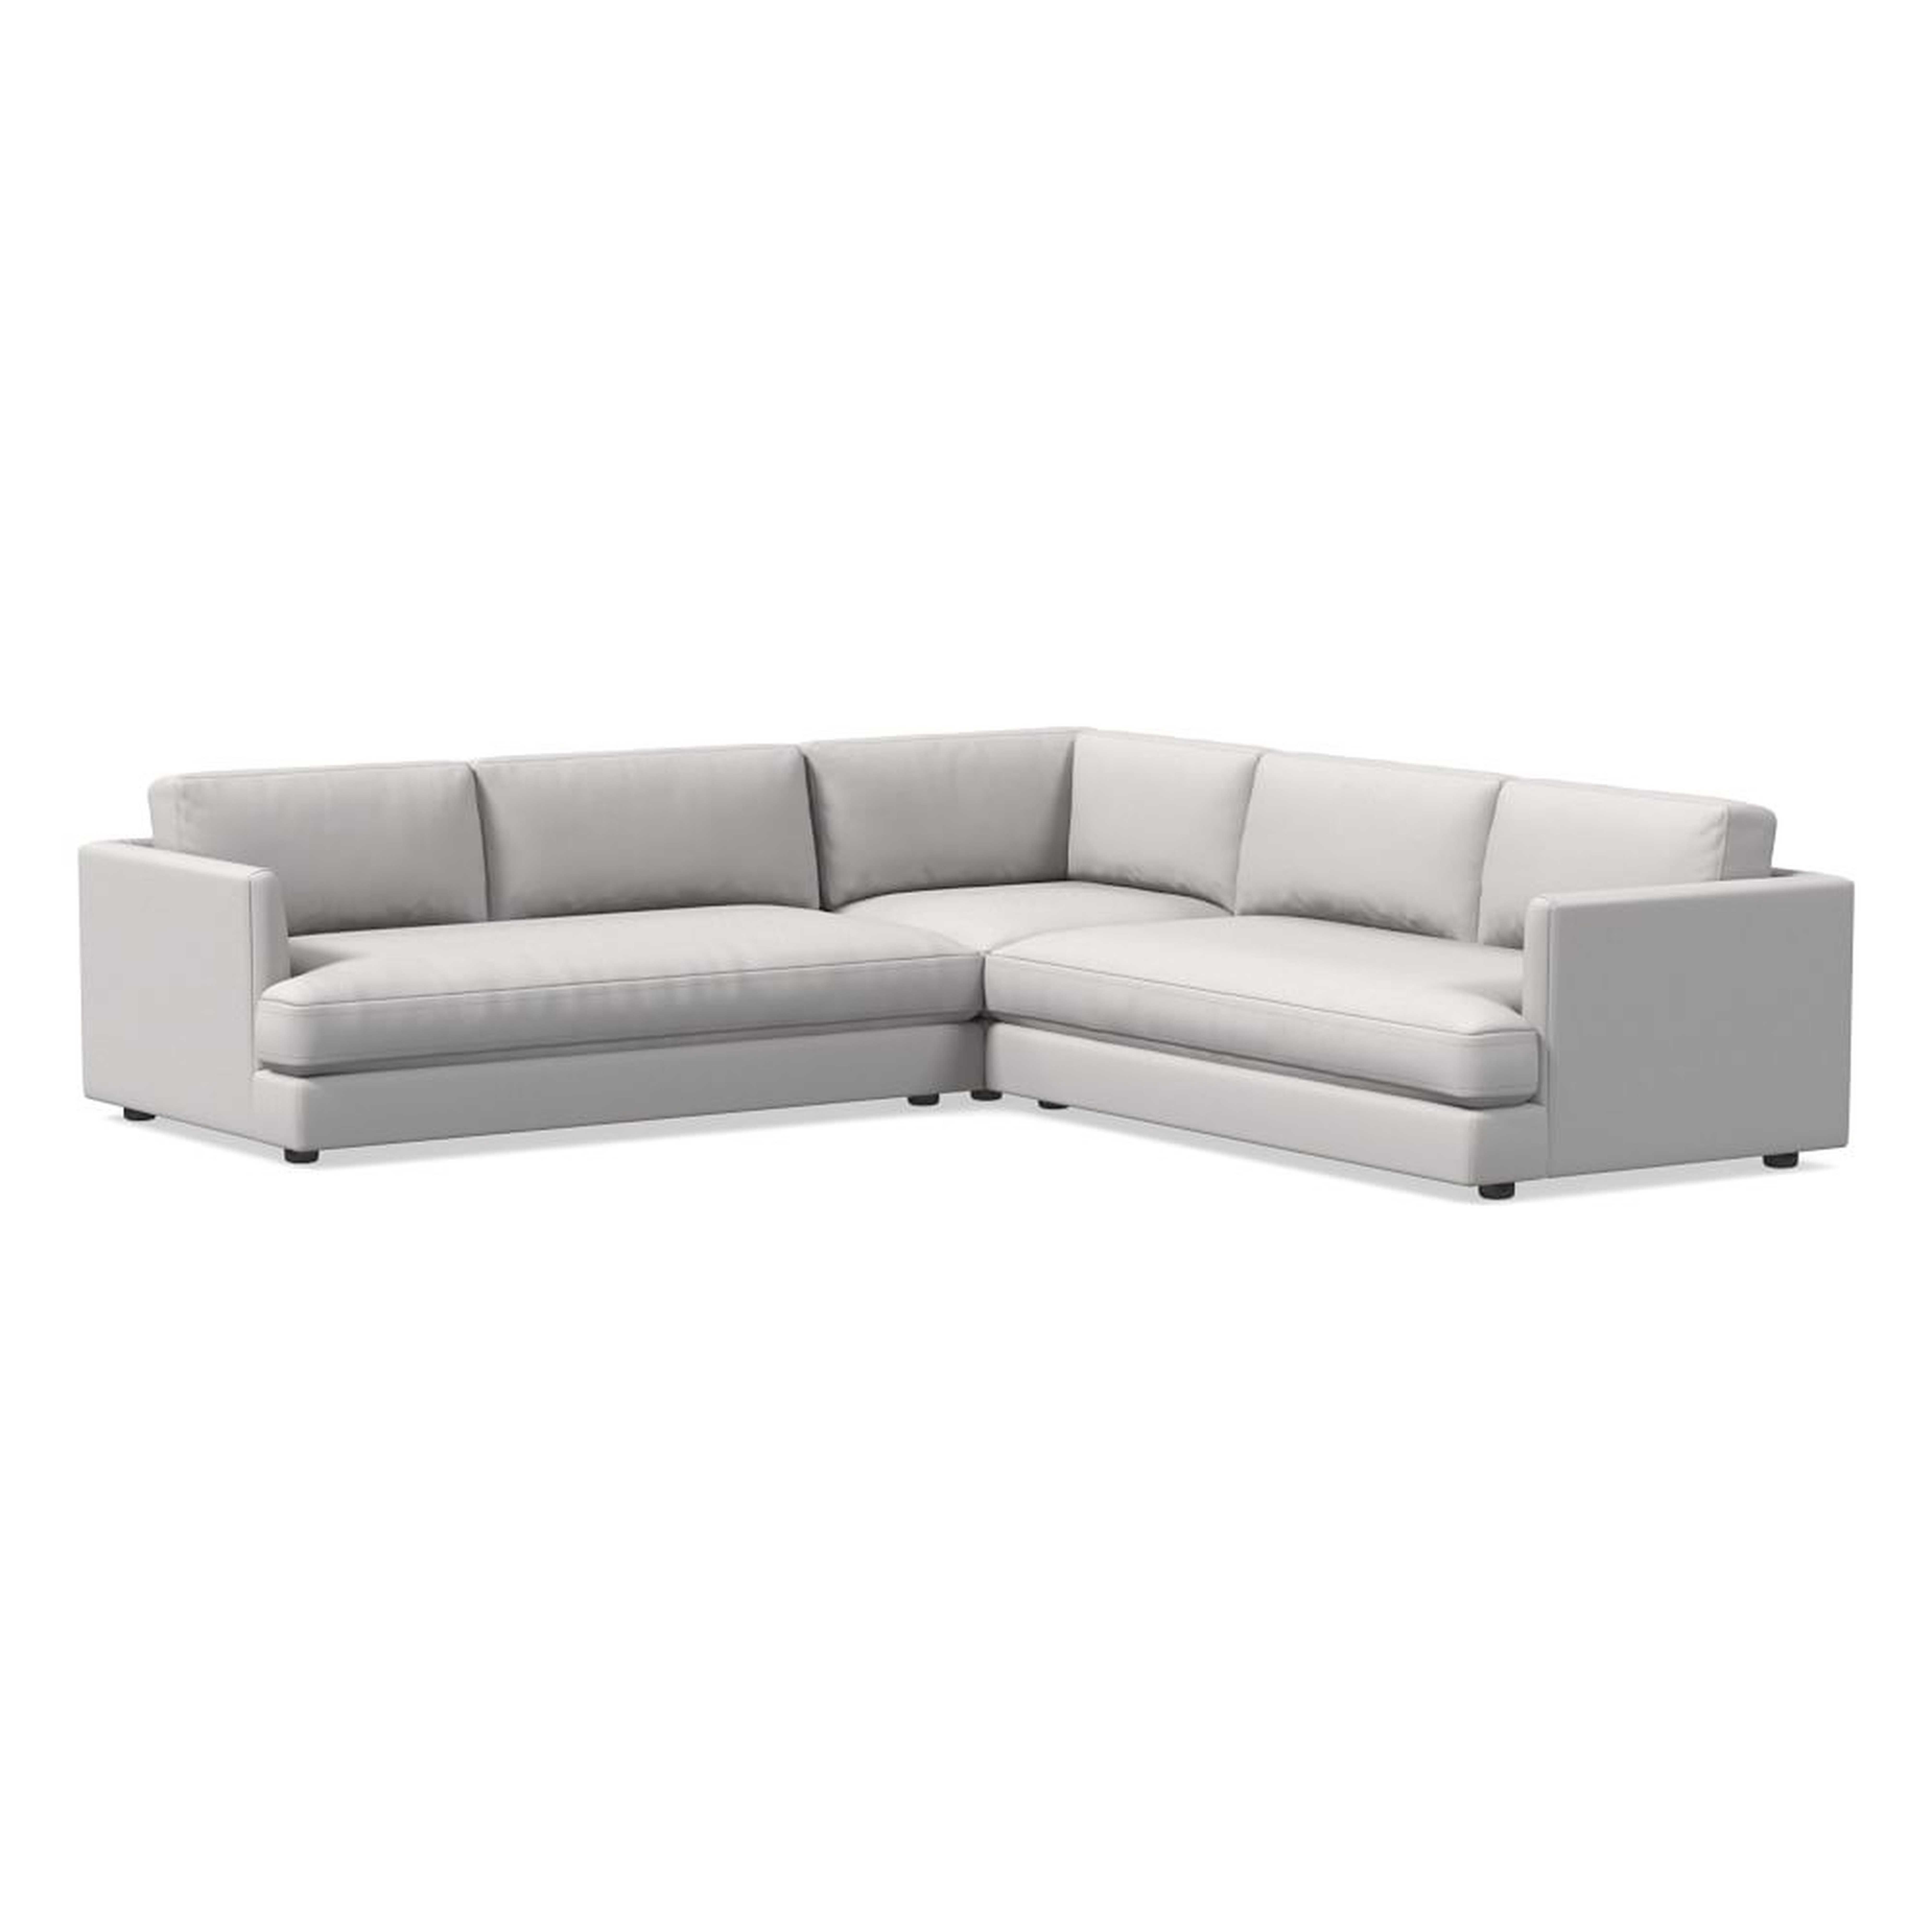 Haven 106" Bench Cushion 3-Piece L-Shaped Sectional, Standard Depth, Performance Washed Canvas, Frost Gray - West Elm